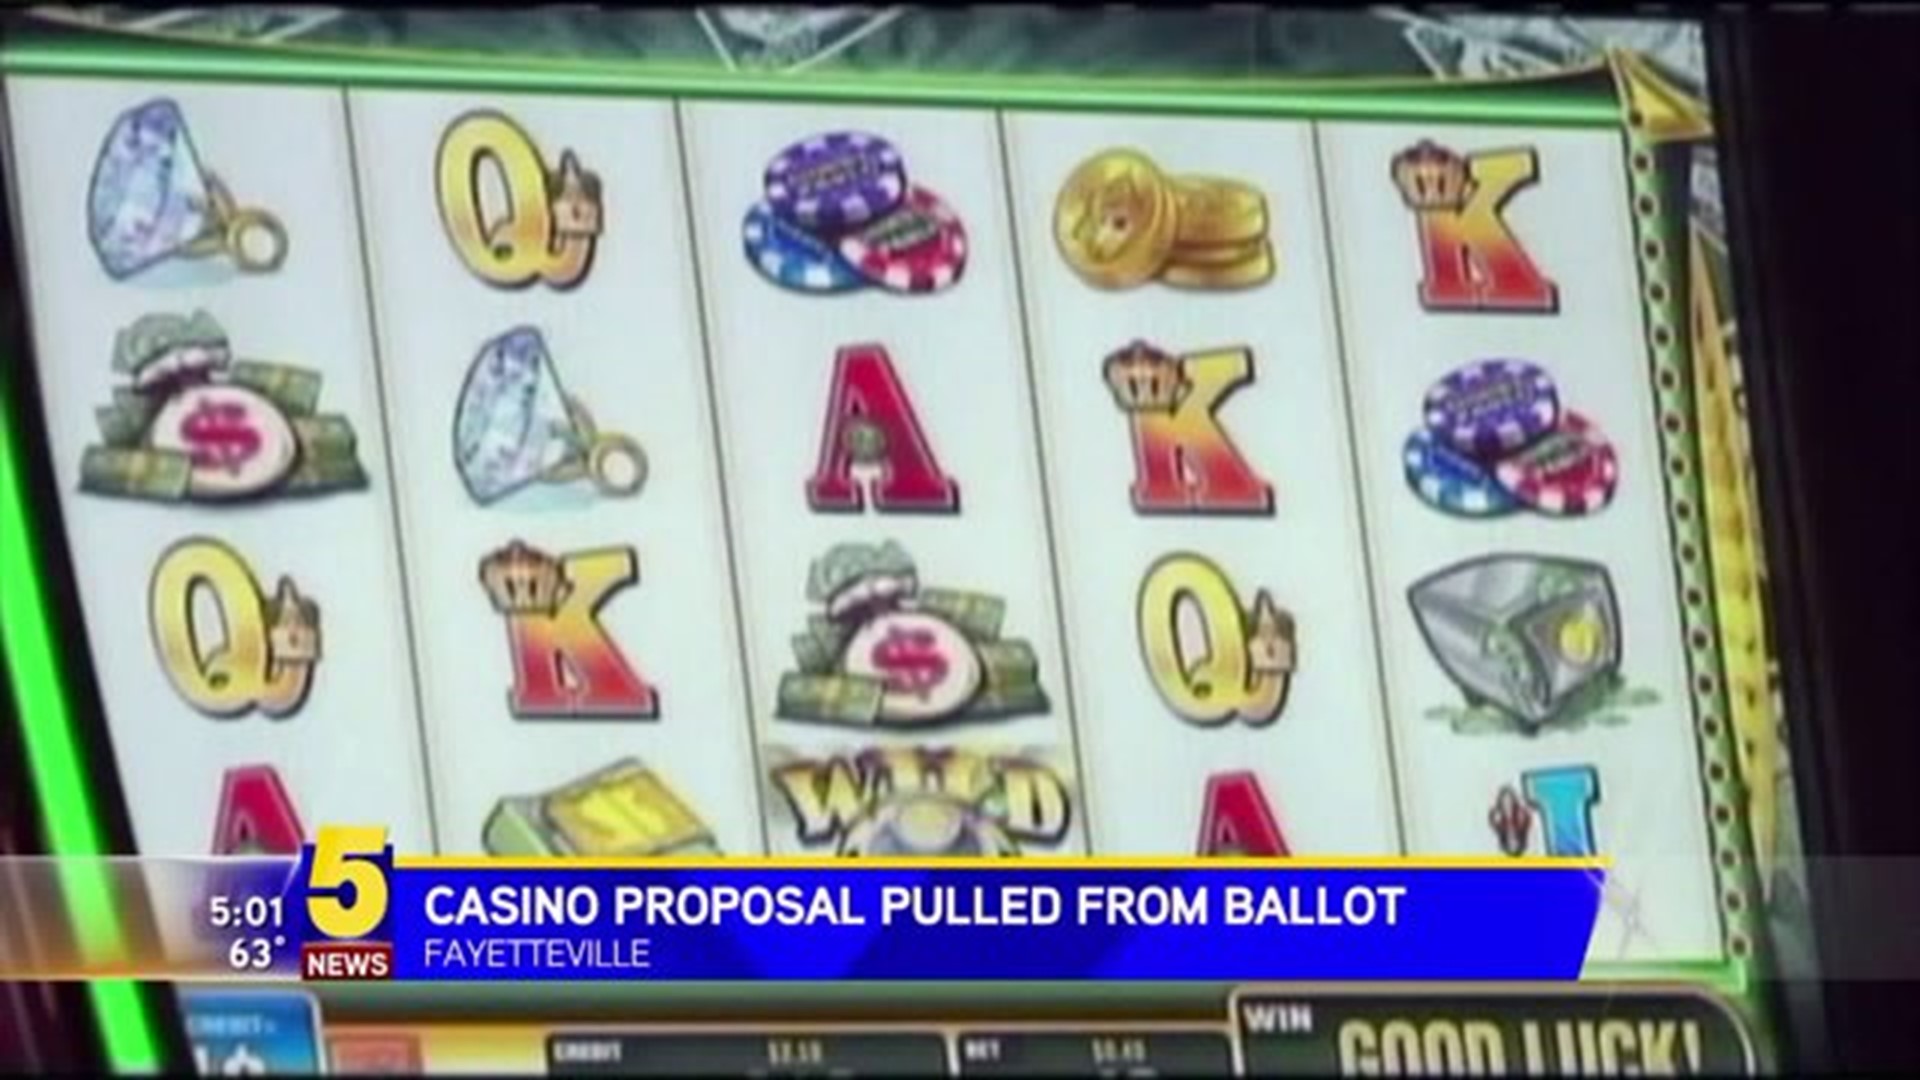 Casino Proposal Pulled From Ballot